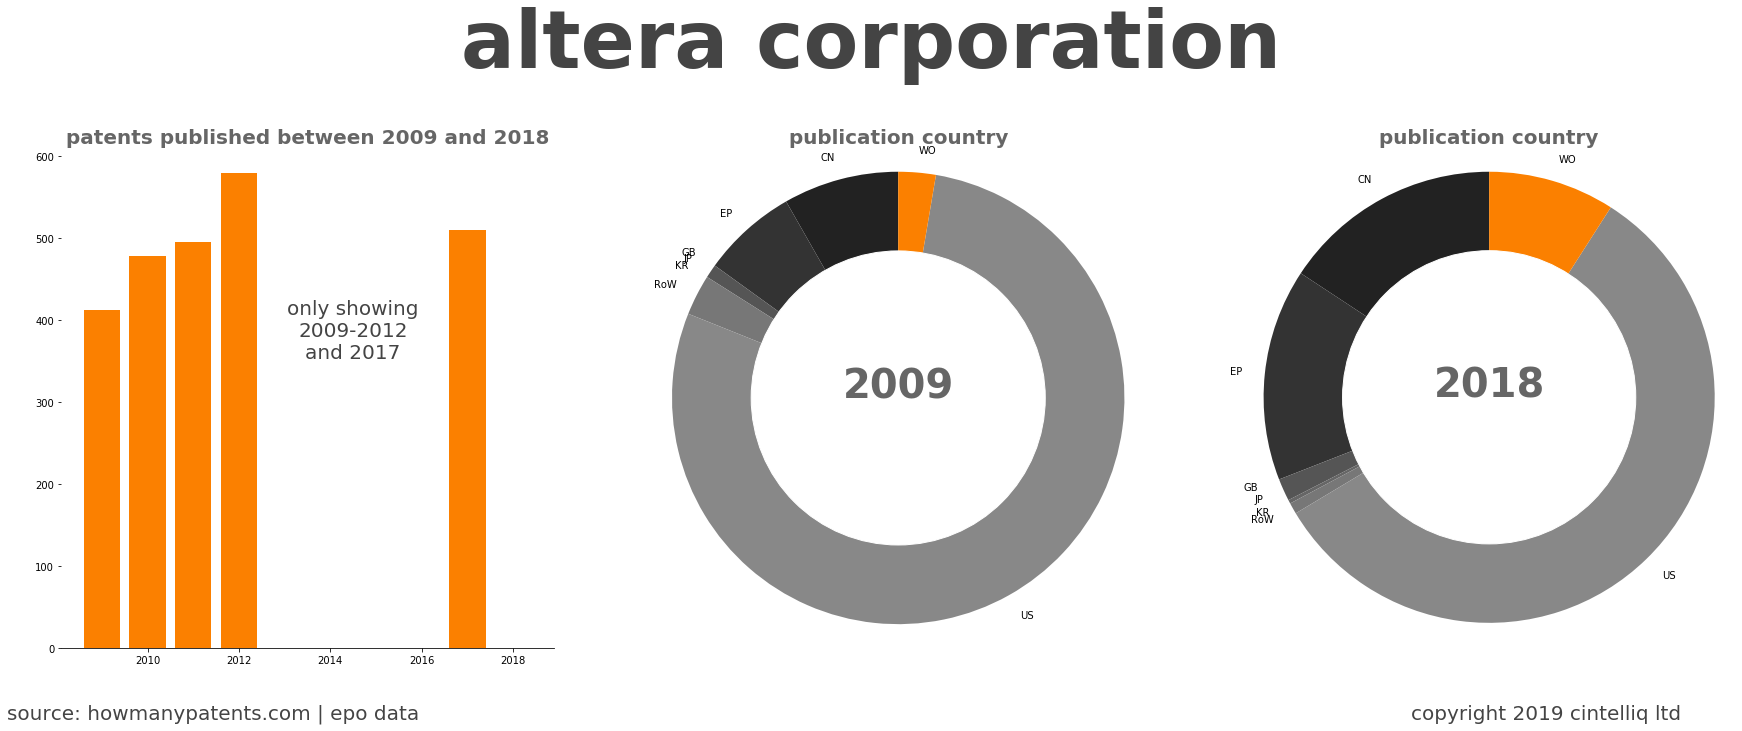 summary of patents for Altera Corporation